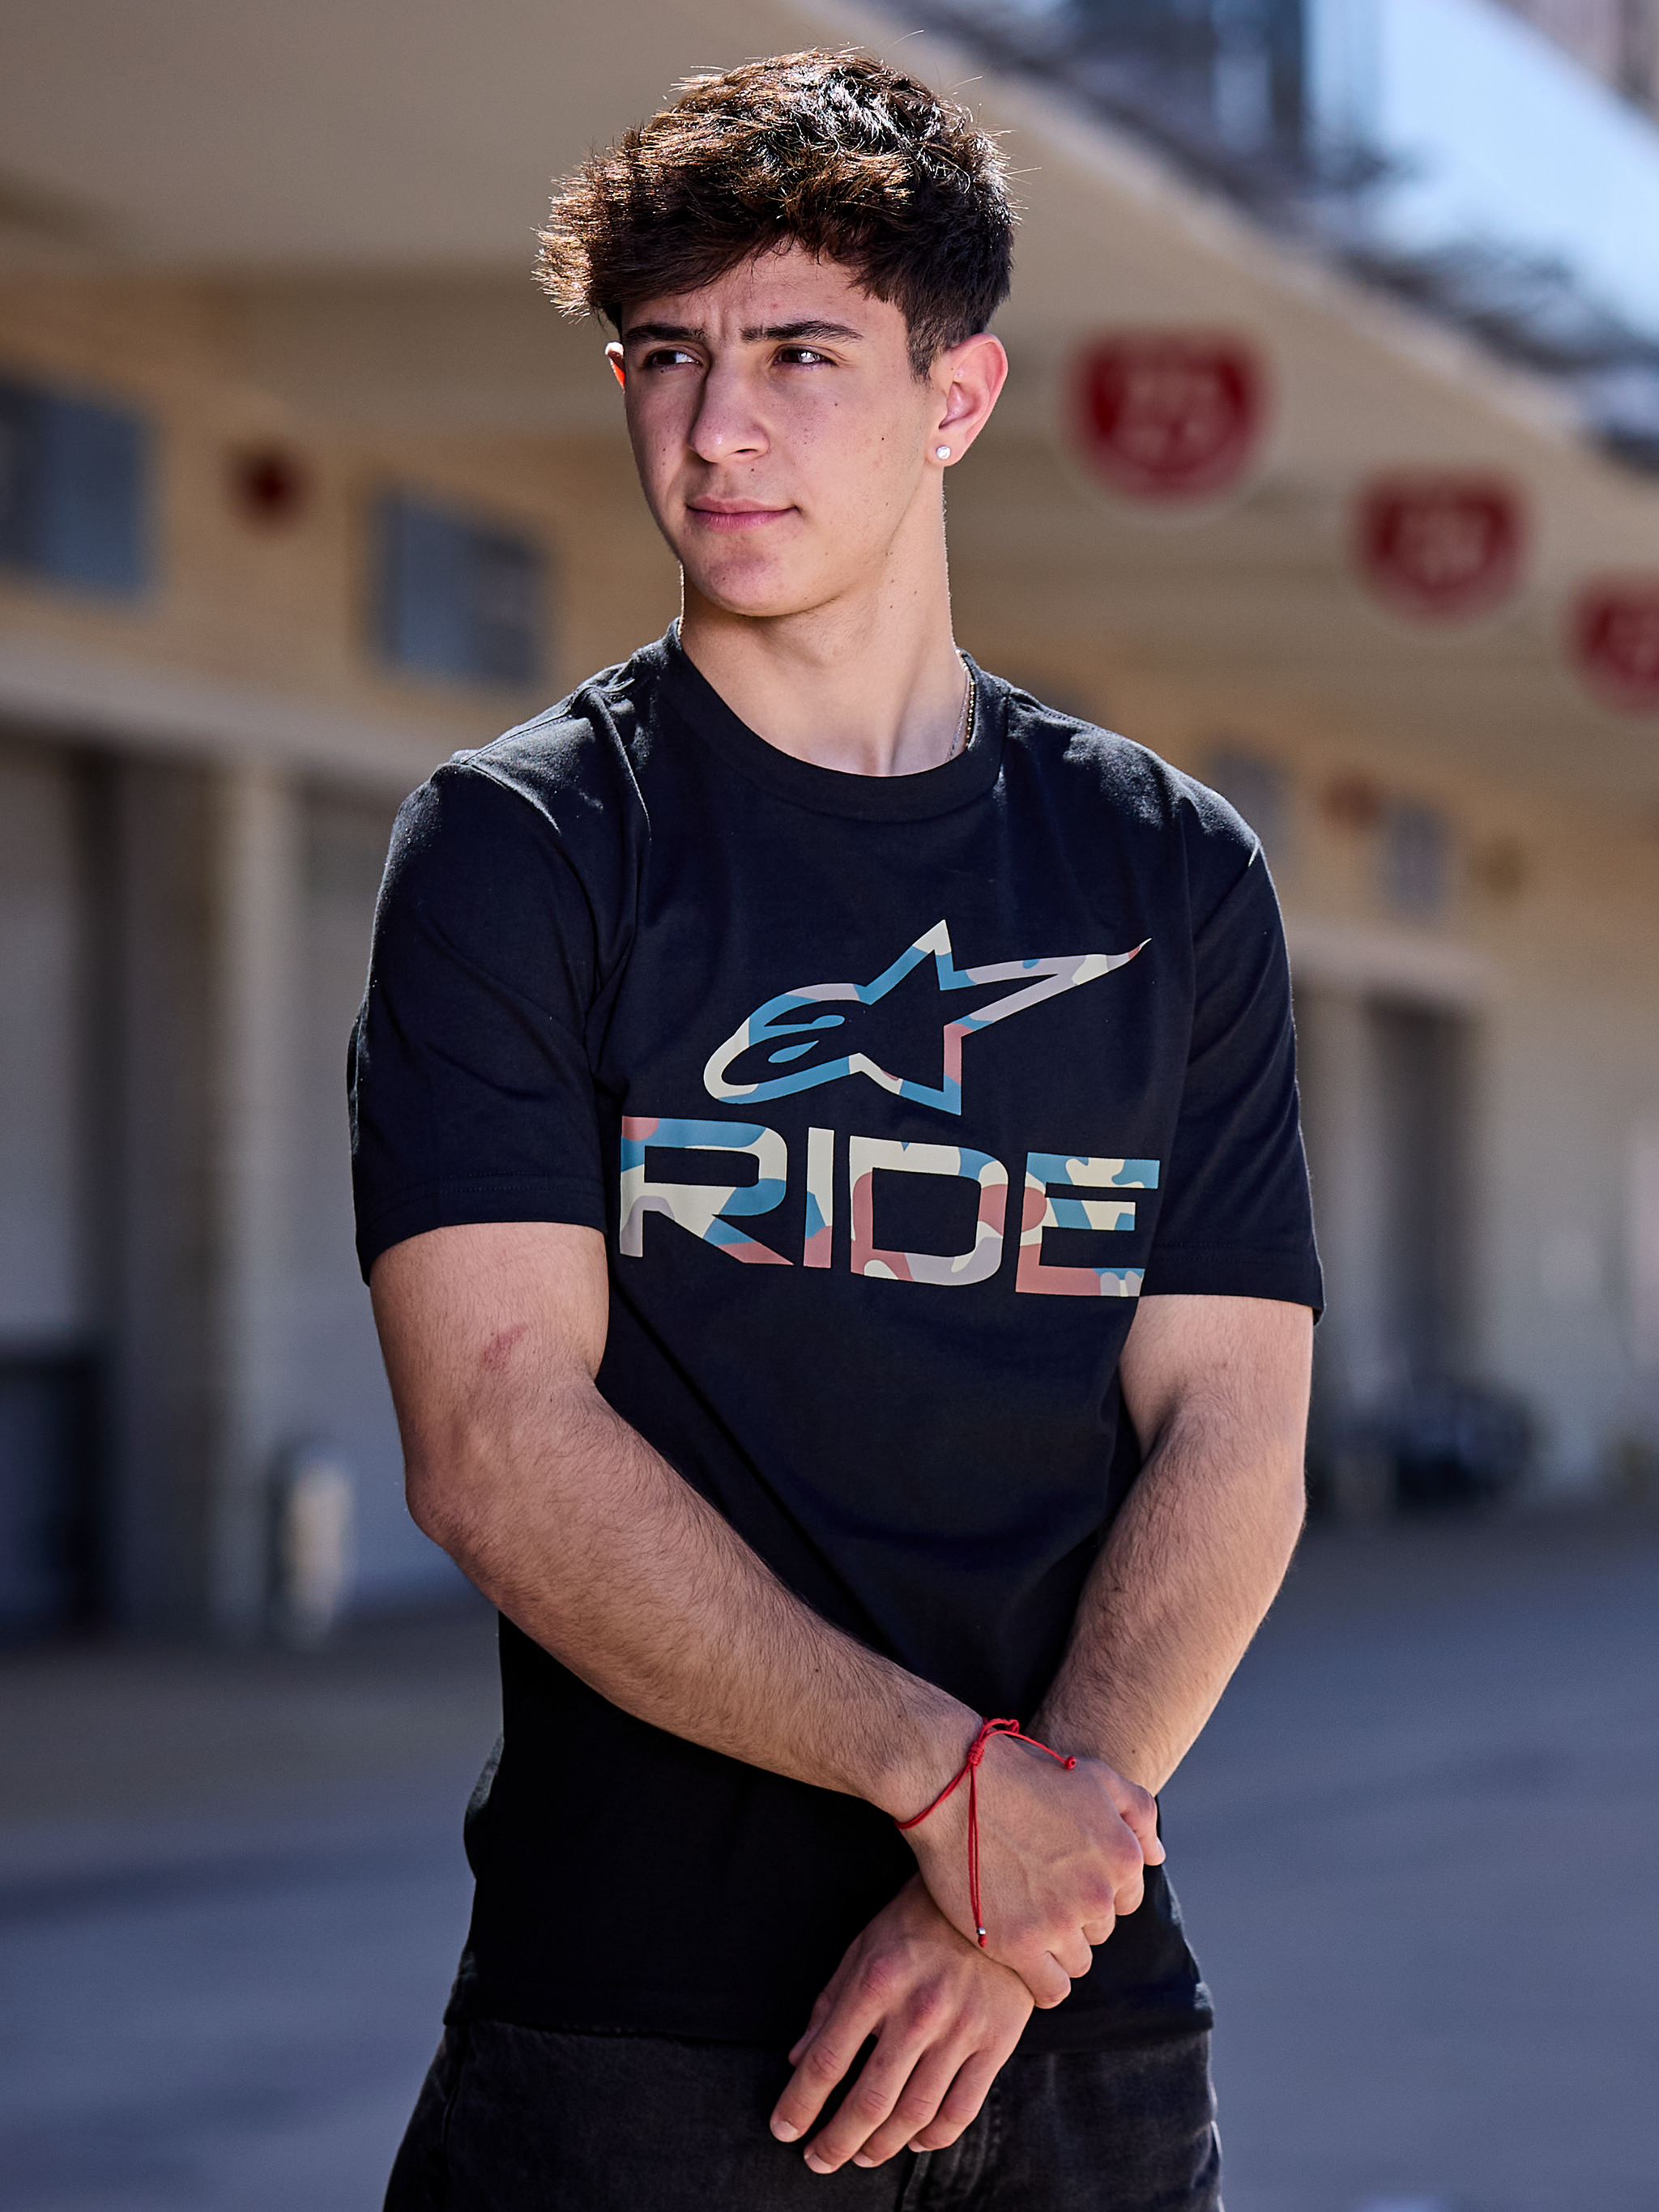 A person stands facing forward, wearing the Alpinestars Ride 4.0 Camo CSF Tee. The black T-shirt features a soft hand print with a colorful graphic logo and the word "RIDE" beneath. The person has short hair and a neutral expression. The background is plain black.